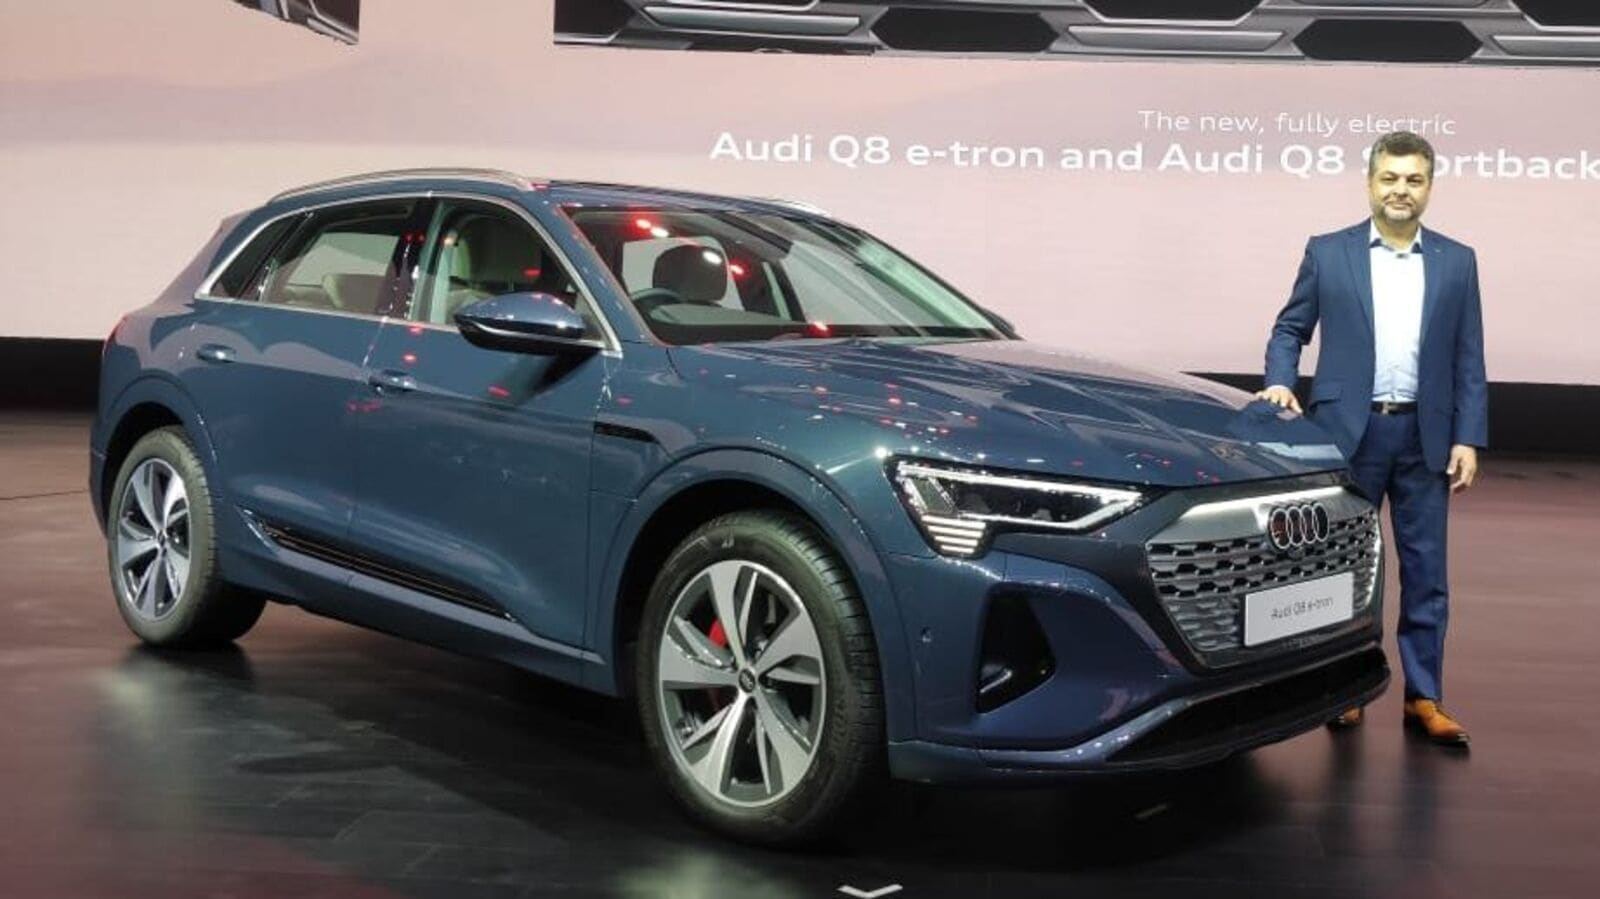 Audi Q8 e-tron electric SUV launched in India, priced from ₹1.14